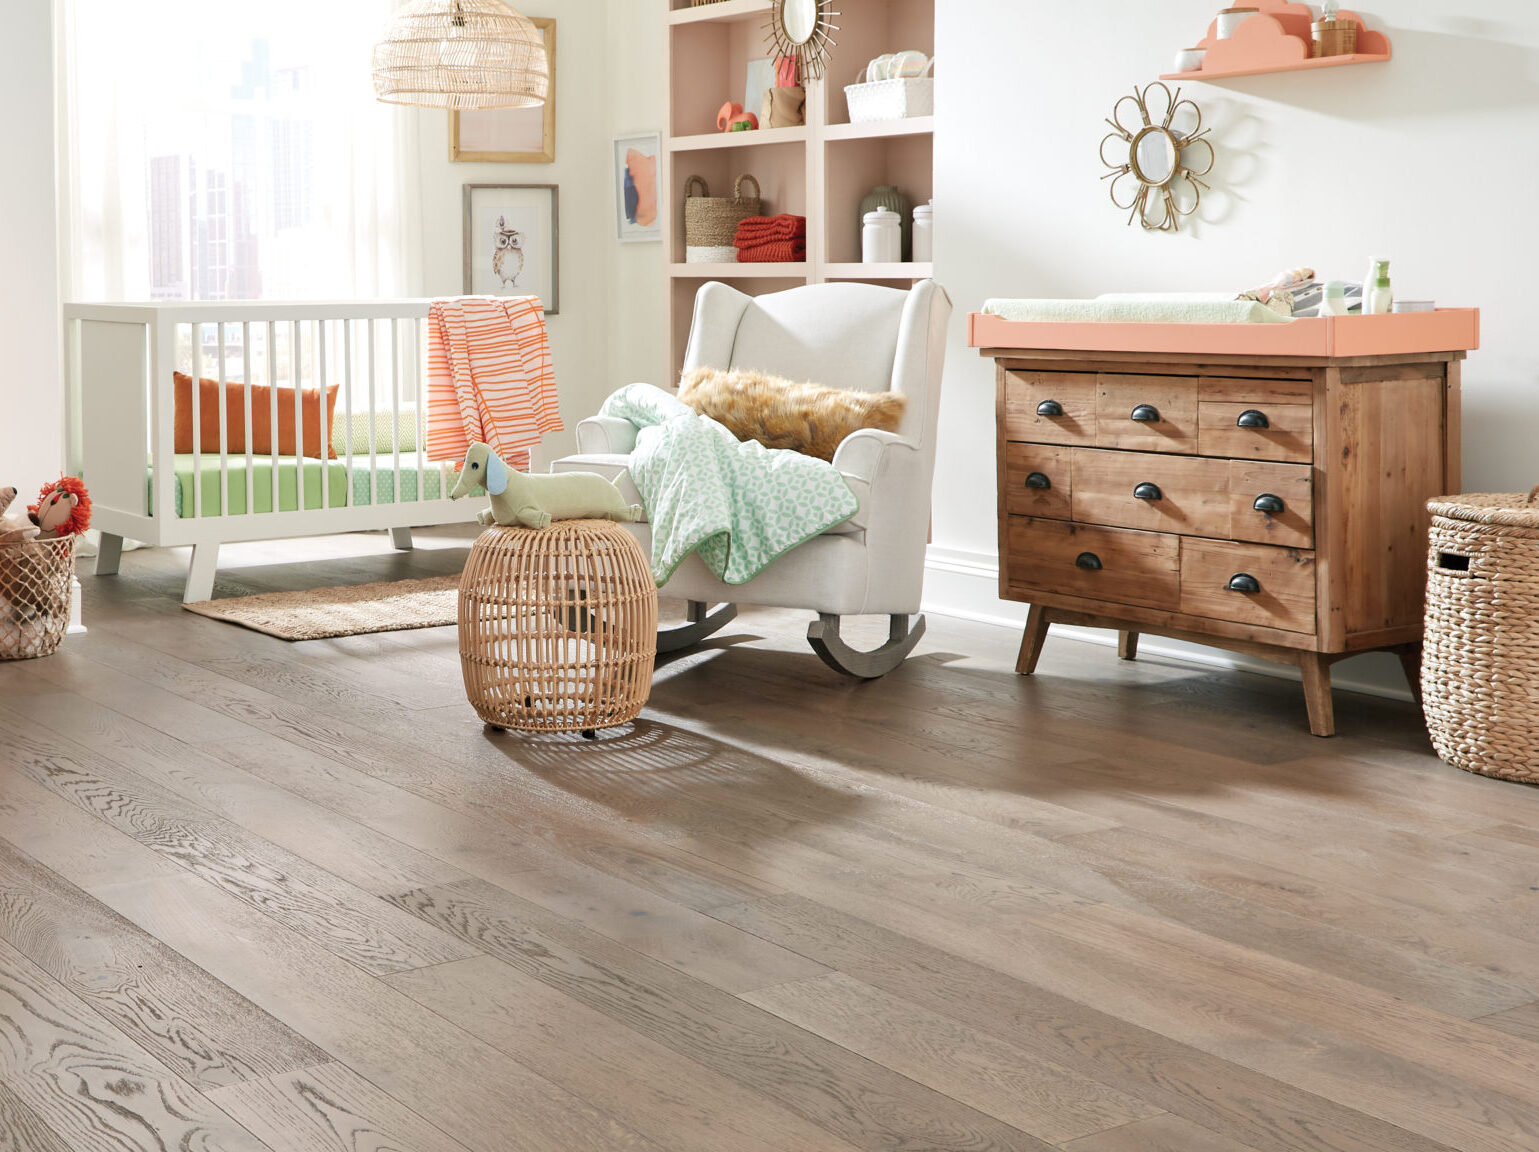 image of baby nursery with wooden floors